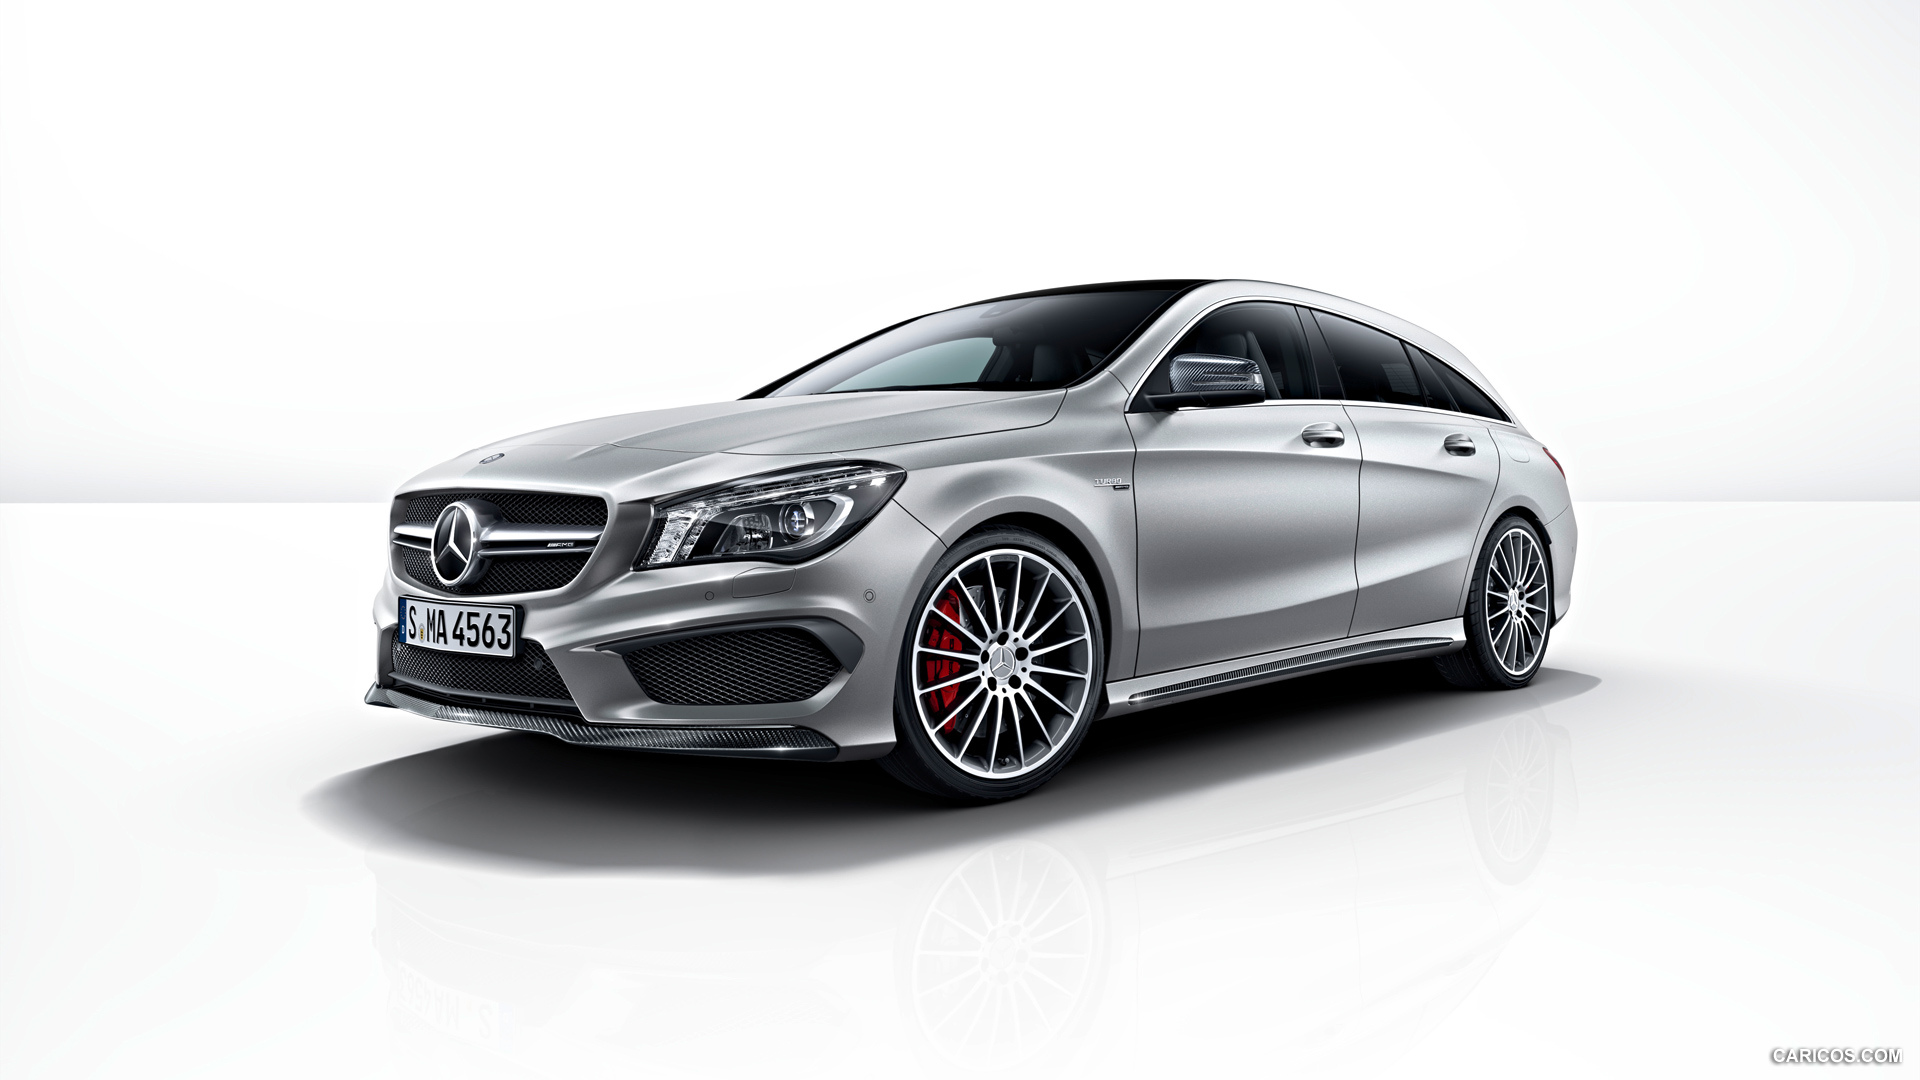 2015 Mercedes-Benz CLA 45 AMG Shooting Brake  - Front, #52 of 70